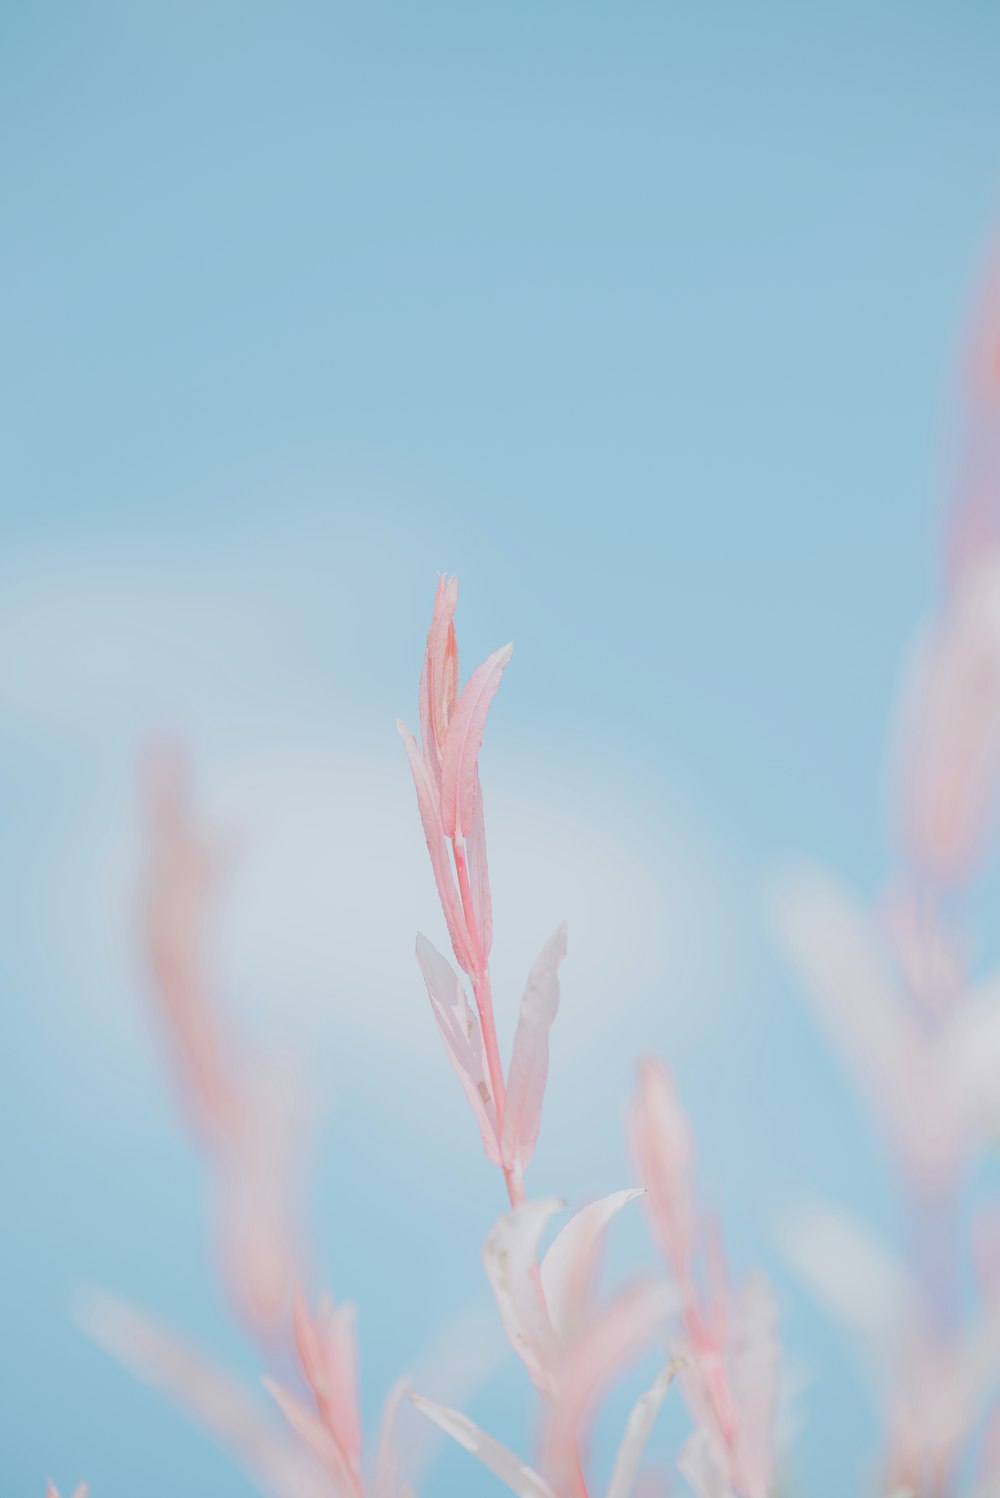 a blurry photo of a pink plant against a blue sky